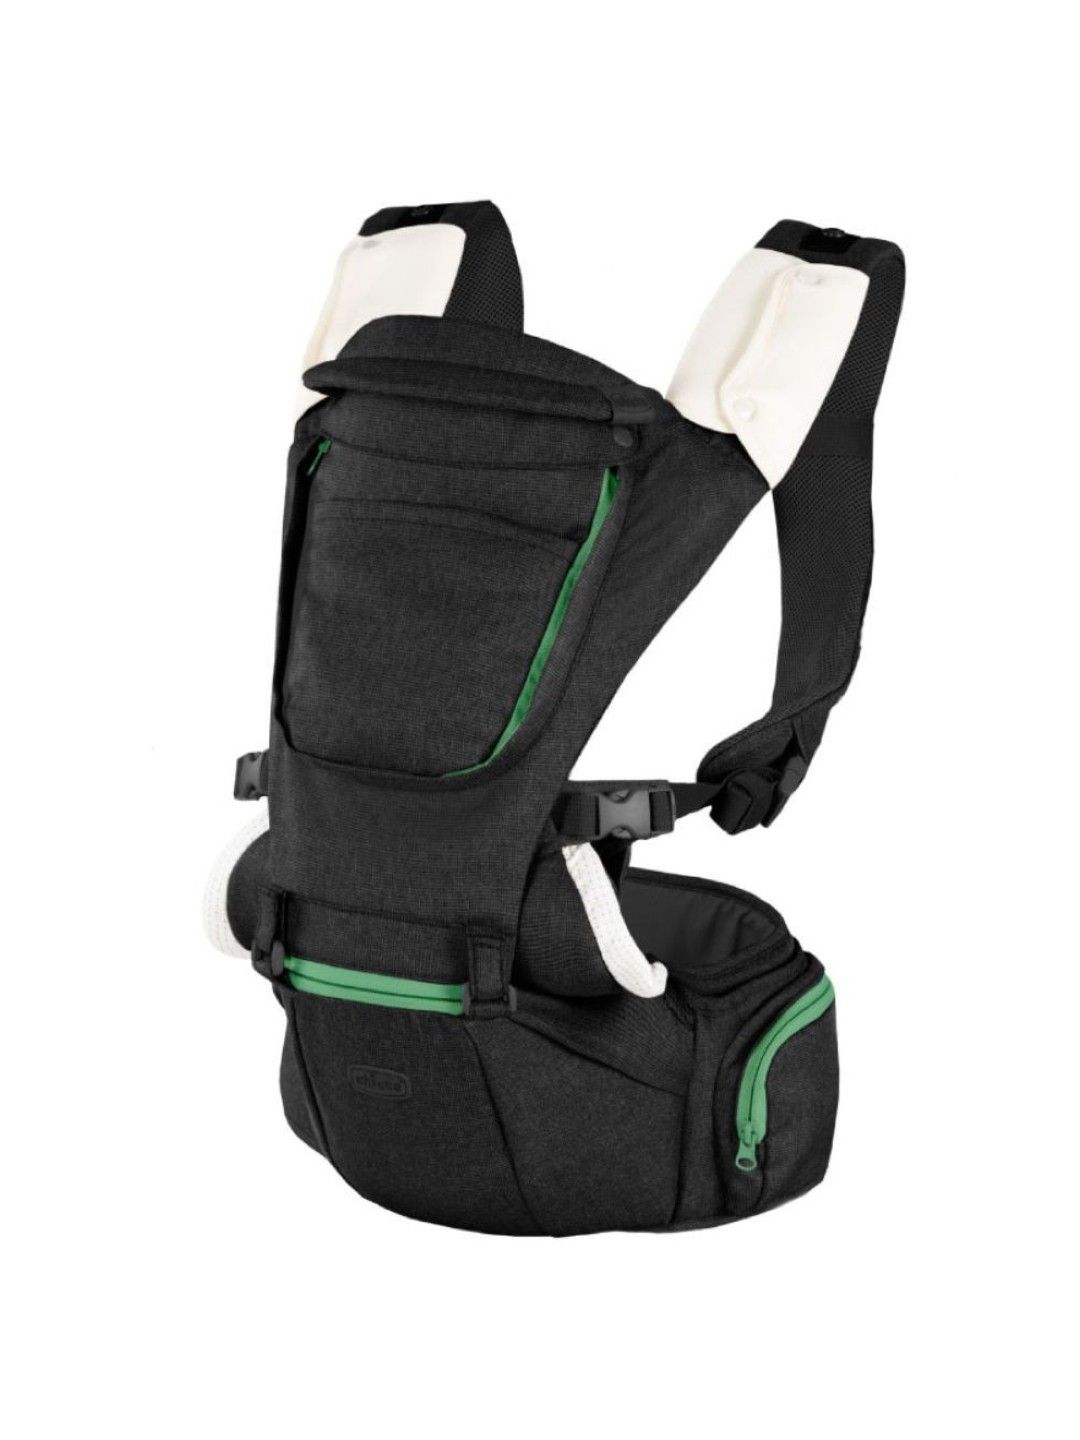 Chicco Hip Seat Carrier, Pirate Black